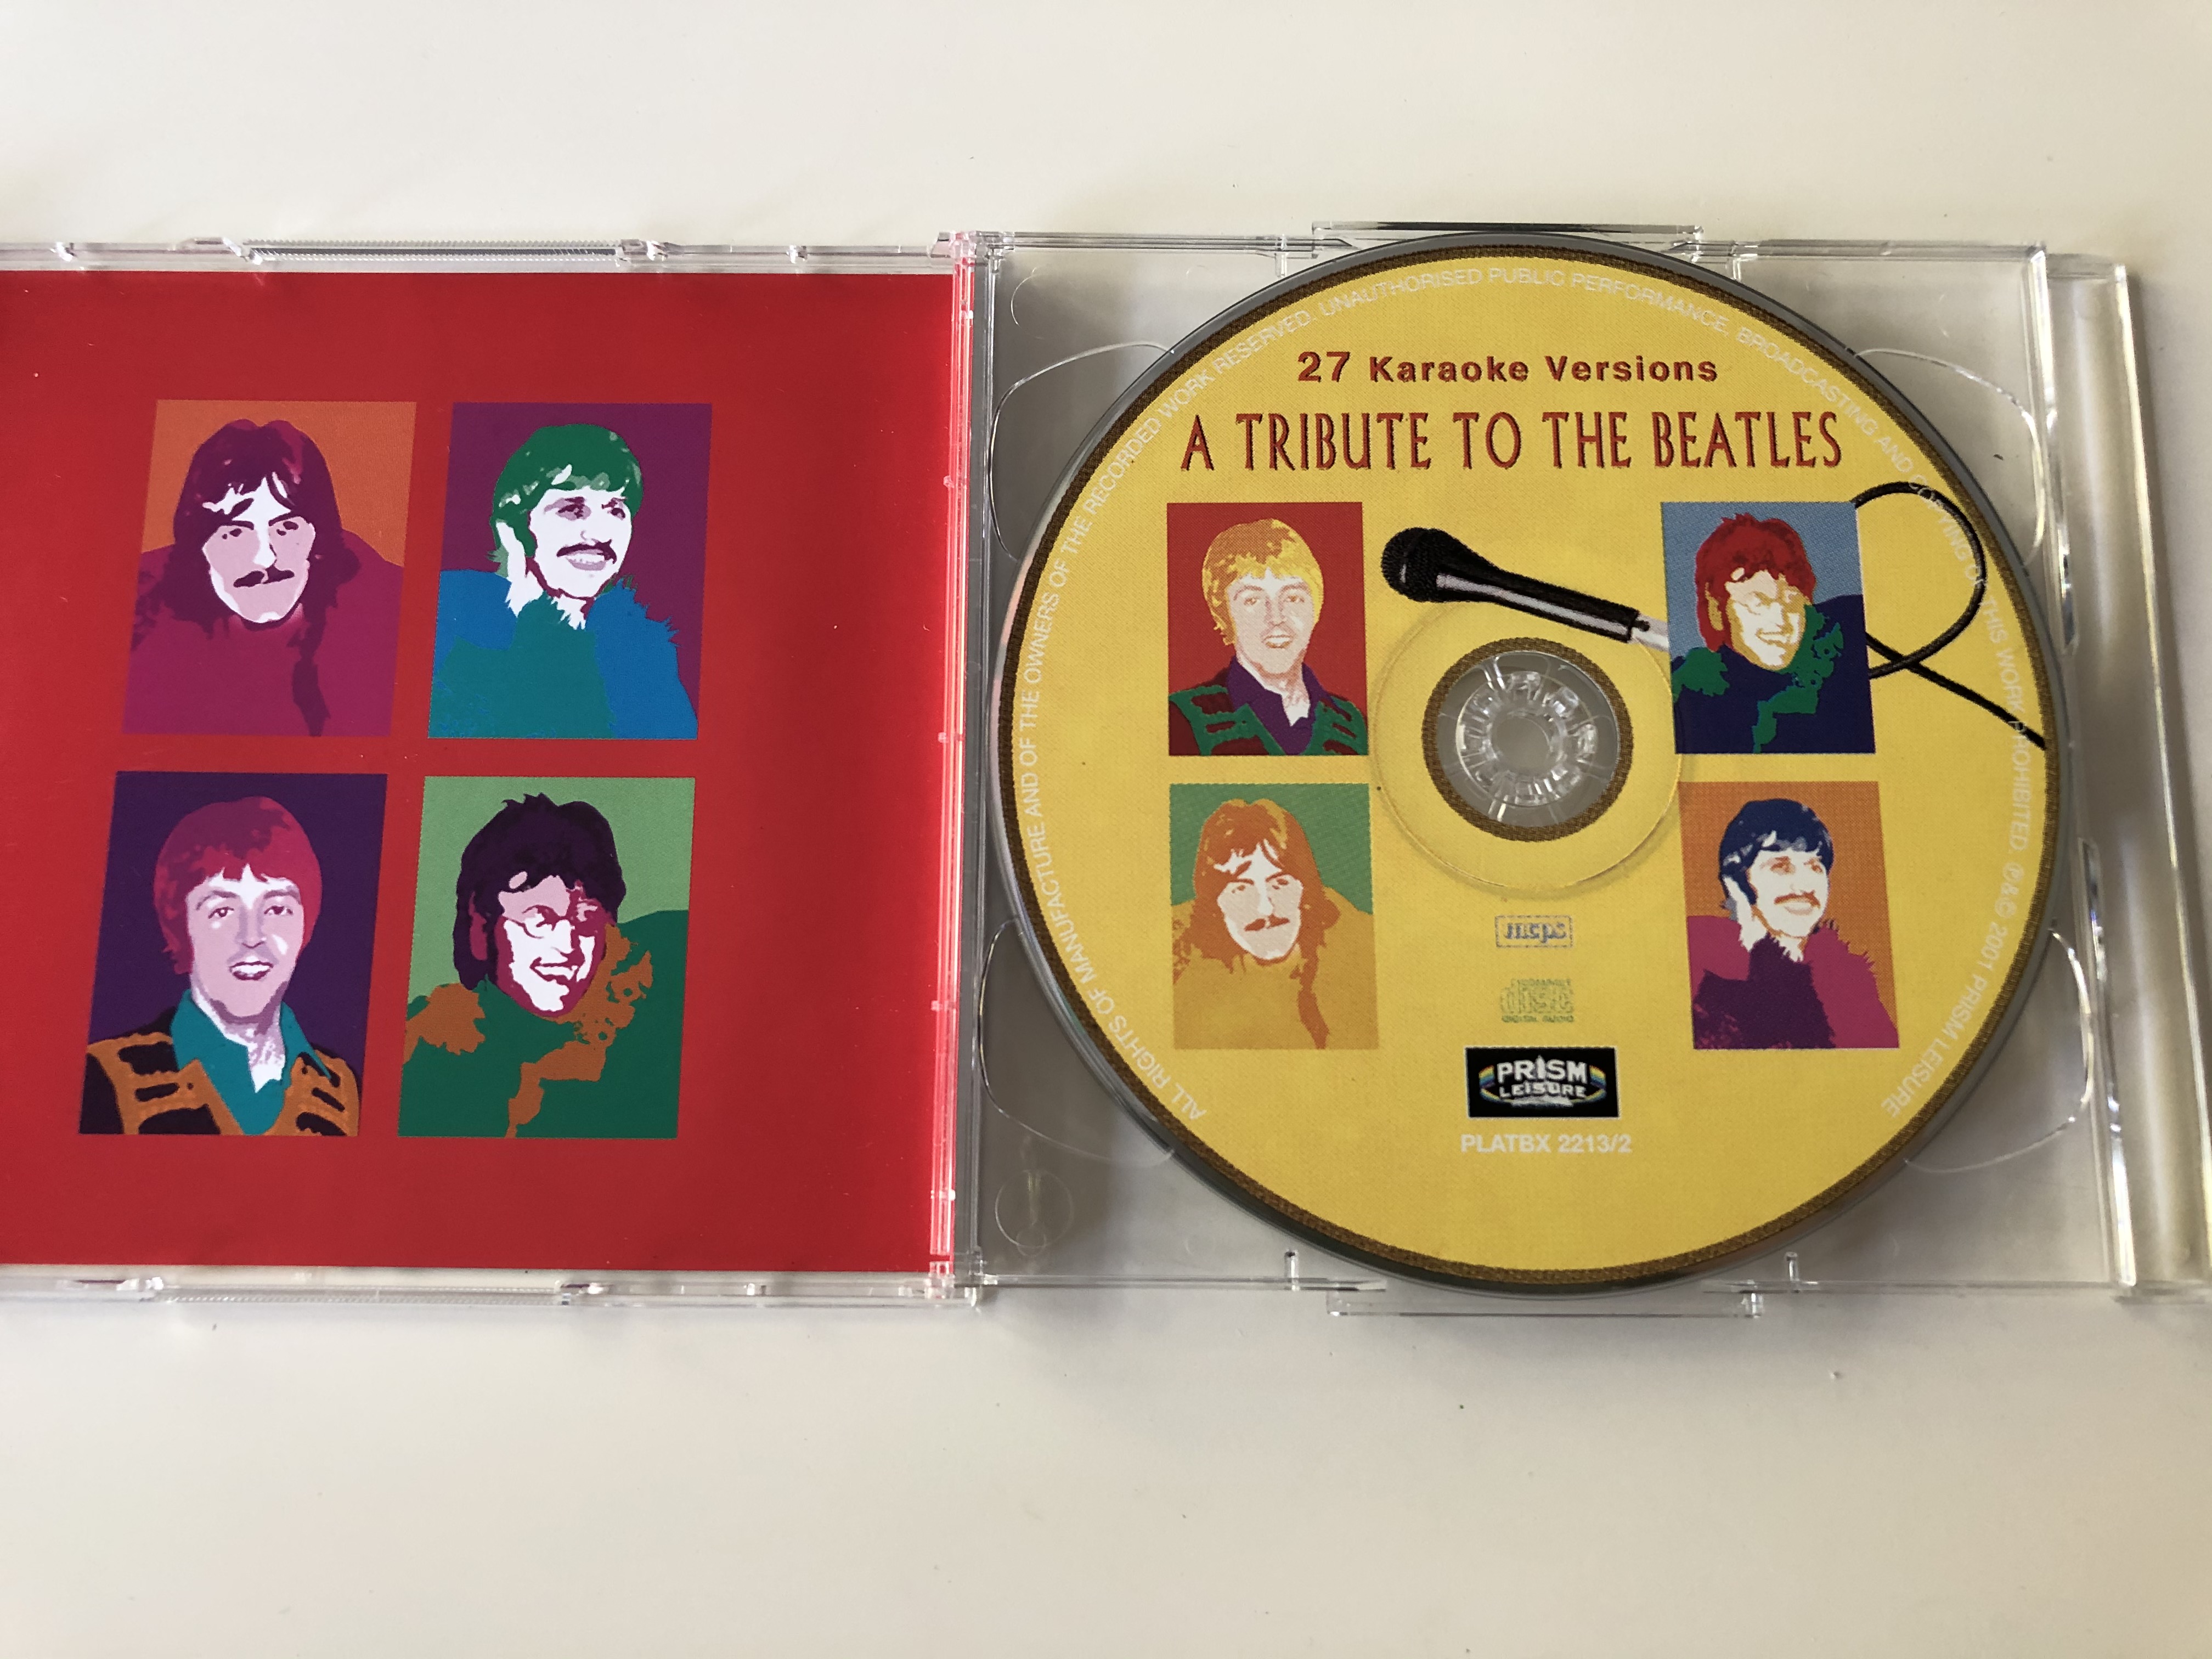 a-tribute-to-the-beatles-featuring-the-27-songs-27-karaoke-versions-performed-by-the-day-trippers-prism-leisure-2x-audio-cd-2001-platbx-2213-5-.jpg